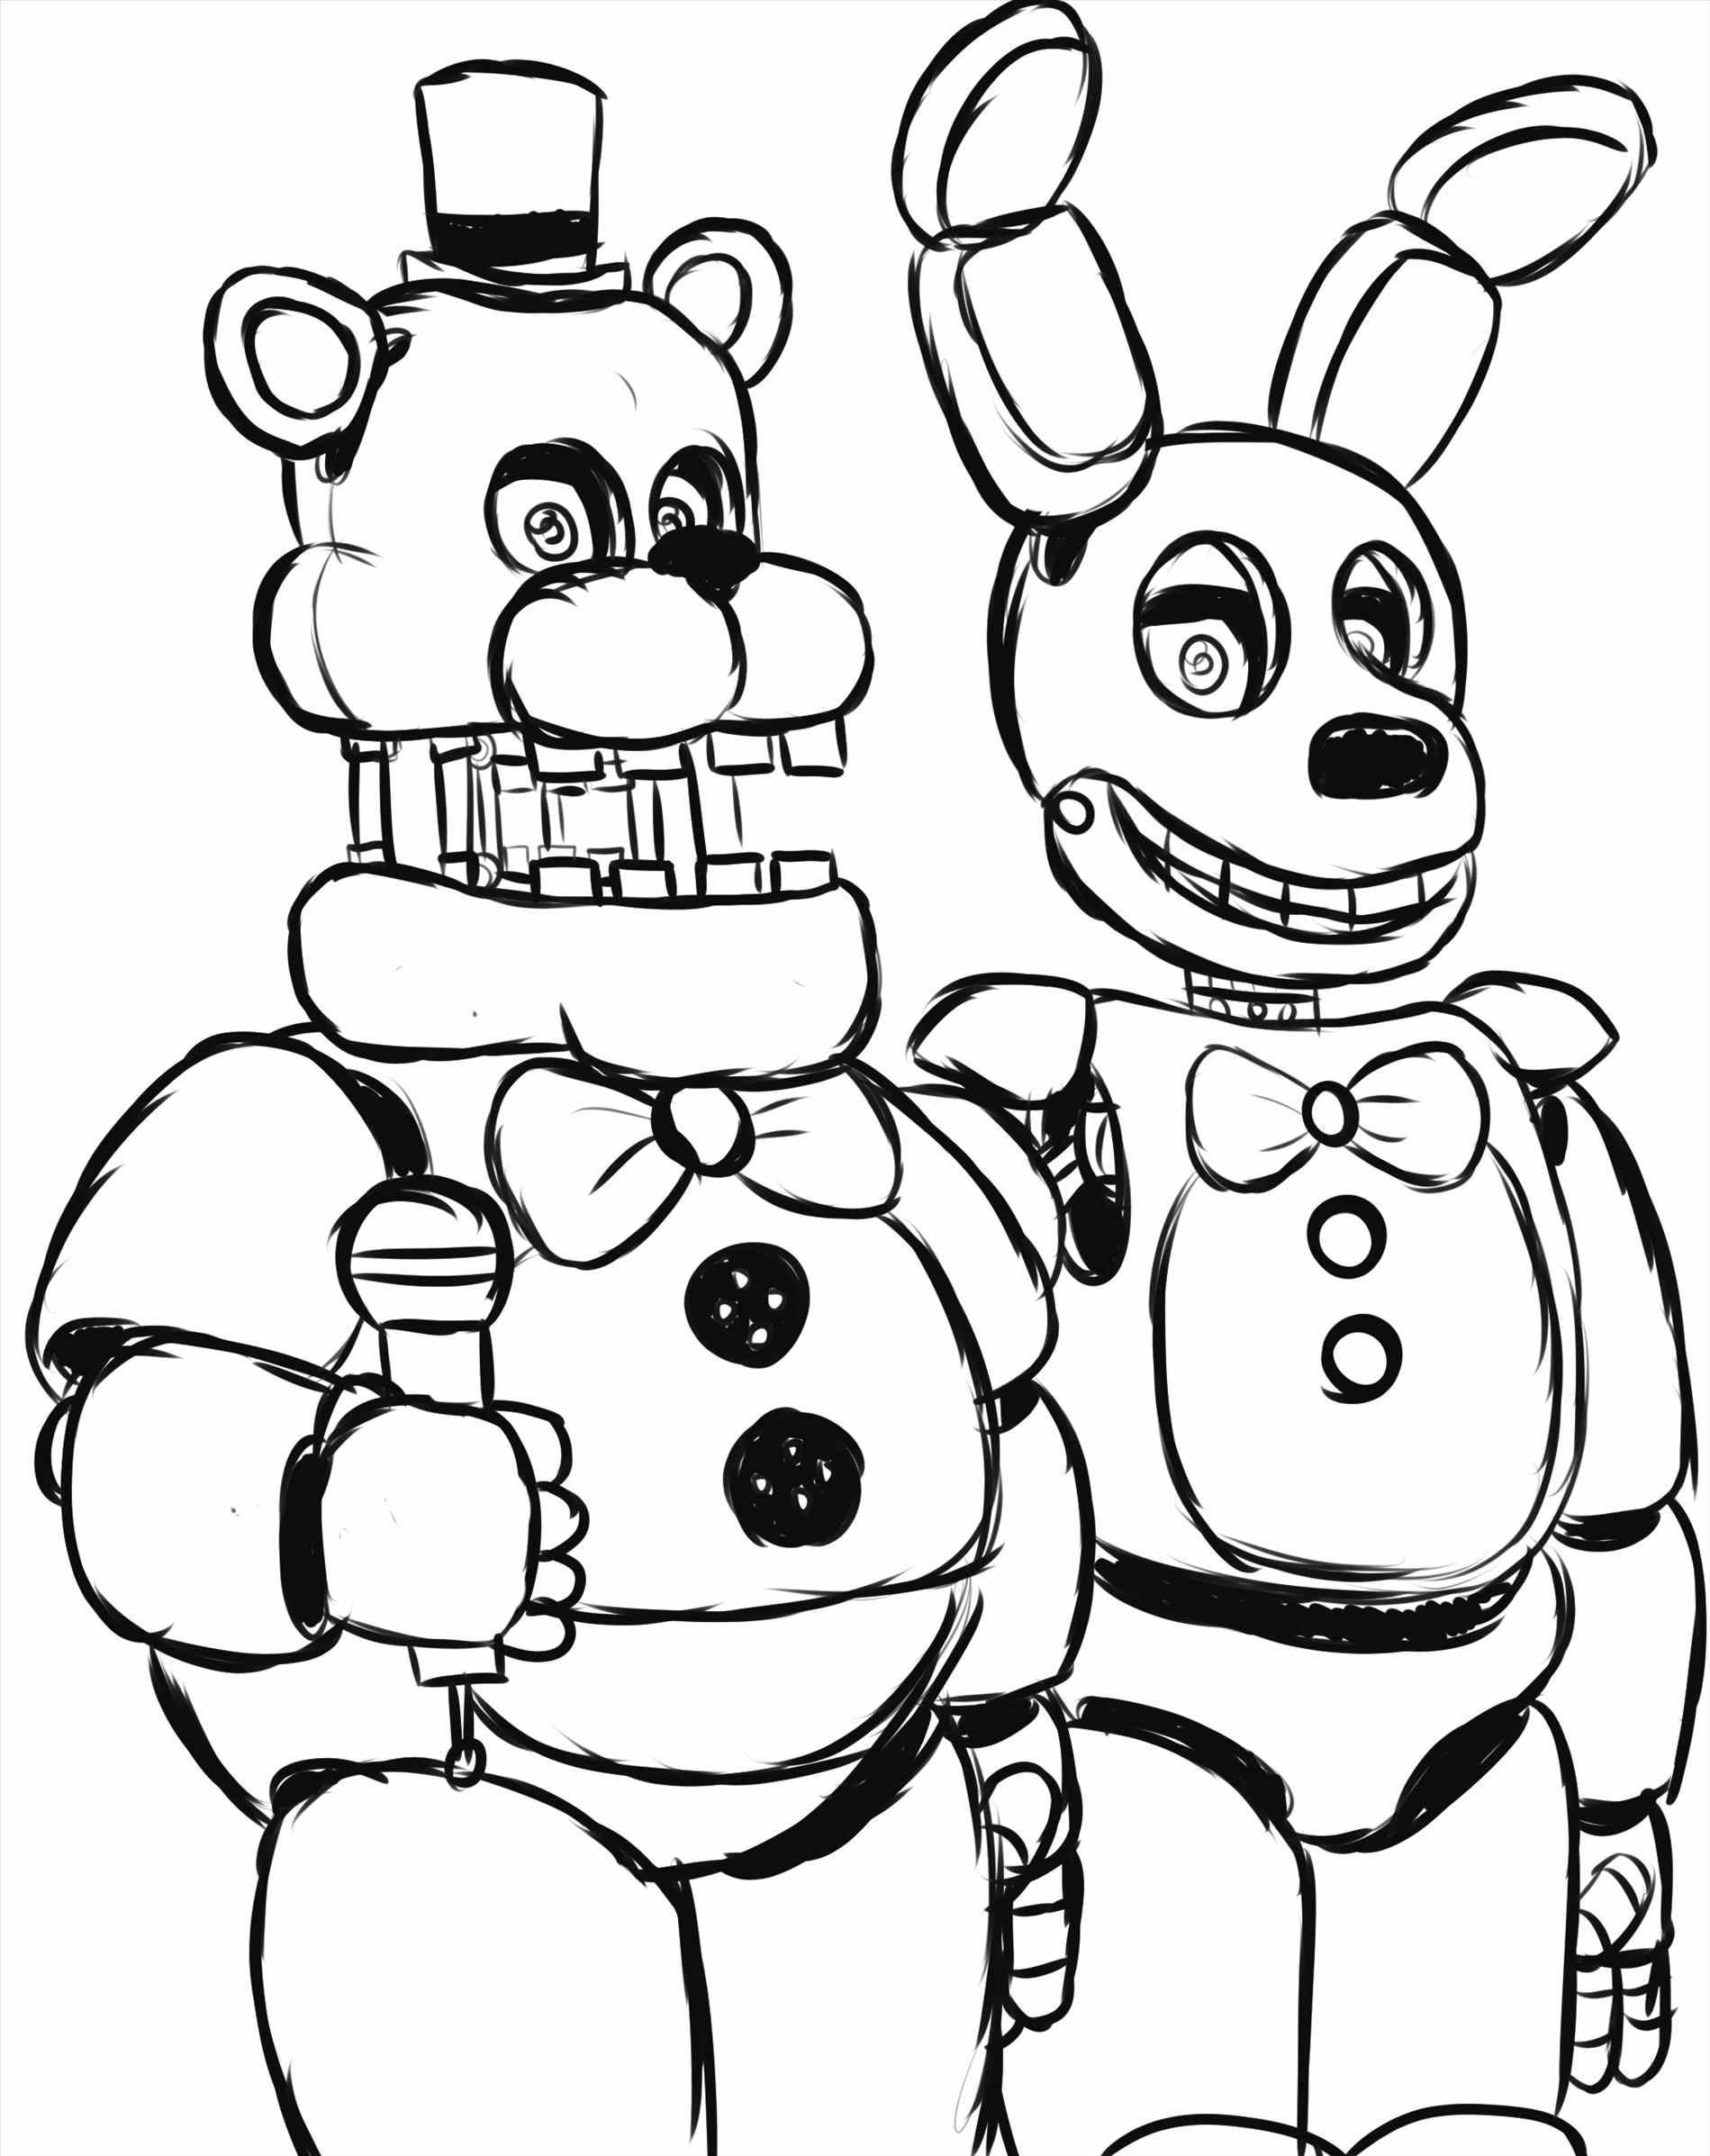 Five Nights At Freddy's Coloring Pages Foxy Coloring Books Five Nights At Freddys Coloring Pages Freddy S